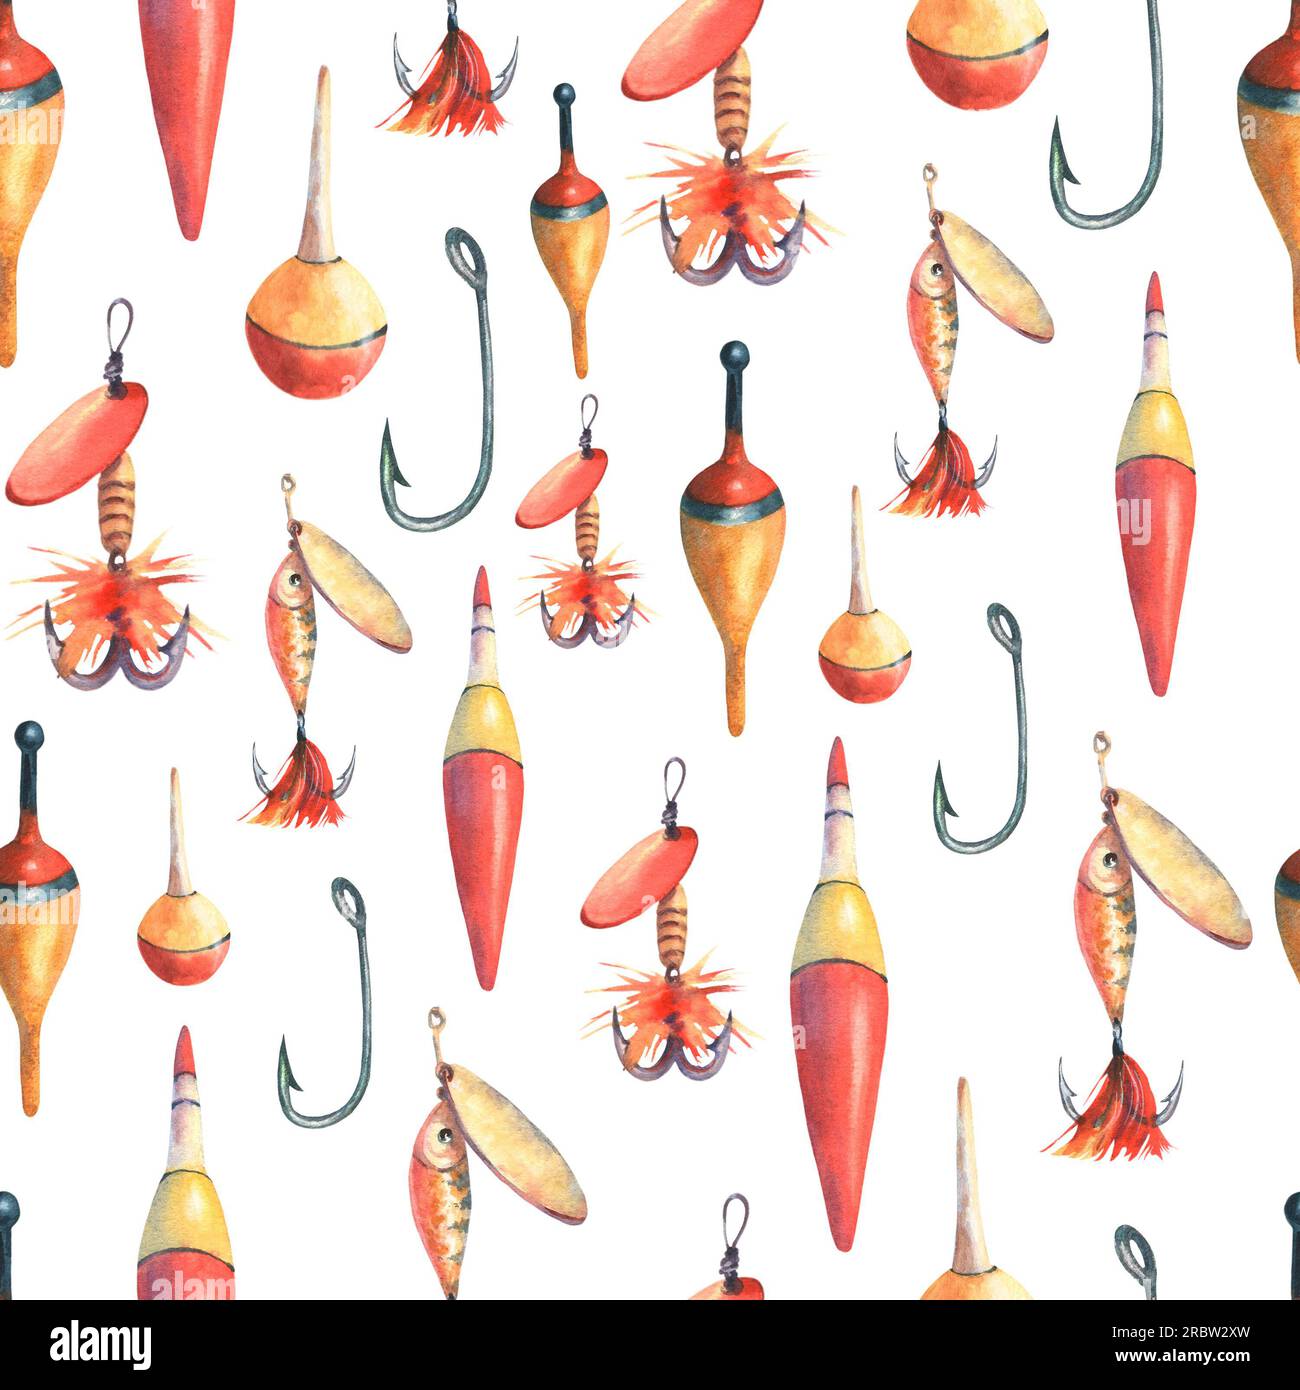 https://c8.alamy.com/comp/2RBW2XW/seamless-pattern-with-fishing-tackle-bobber-float-hooks-and-lures-hand-drawn-watercolor-painting-isolated-on-white-background-cut-out-clip-art-2RBW2XW.jpg